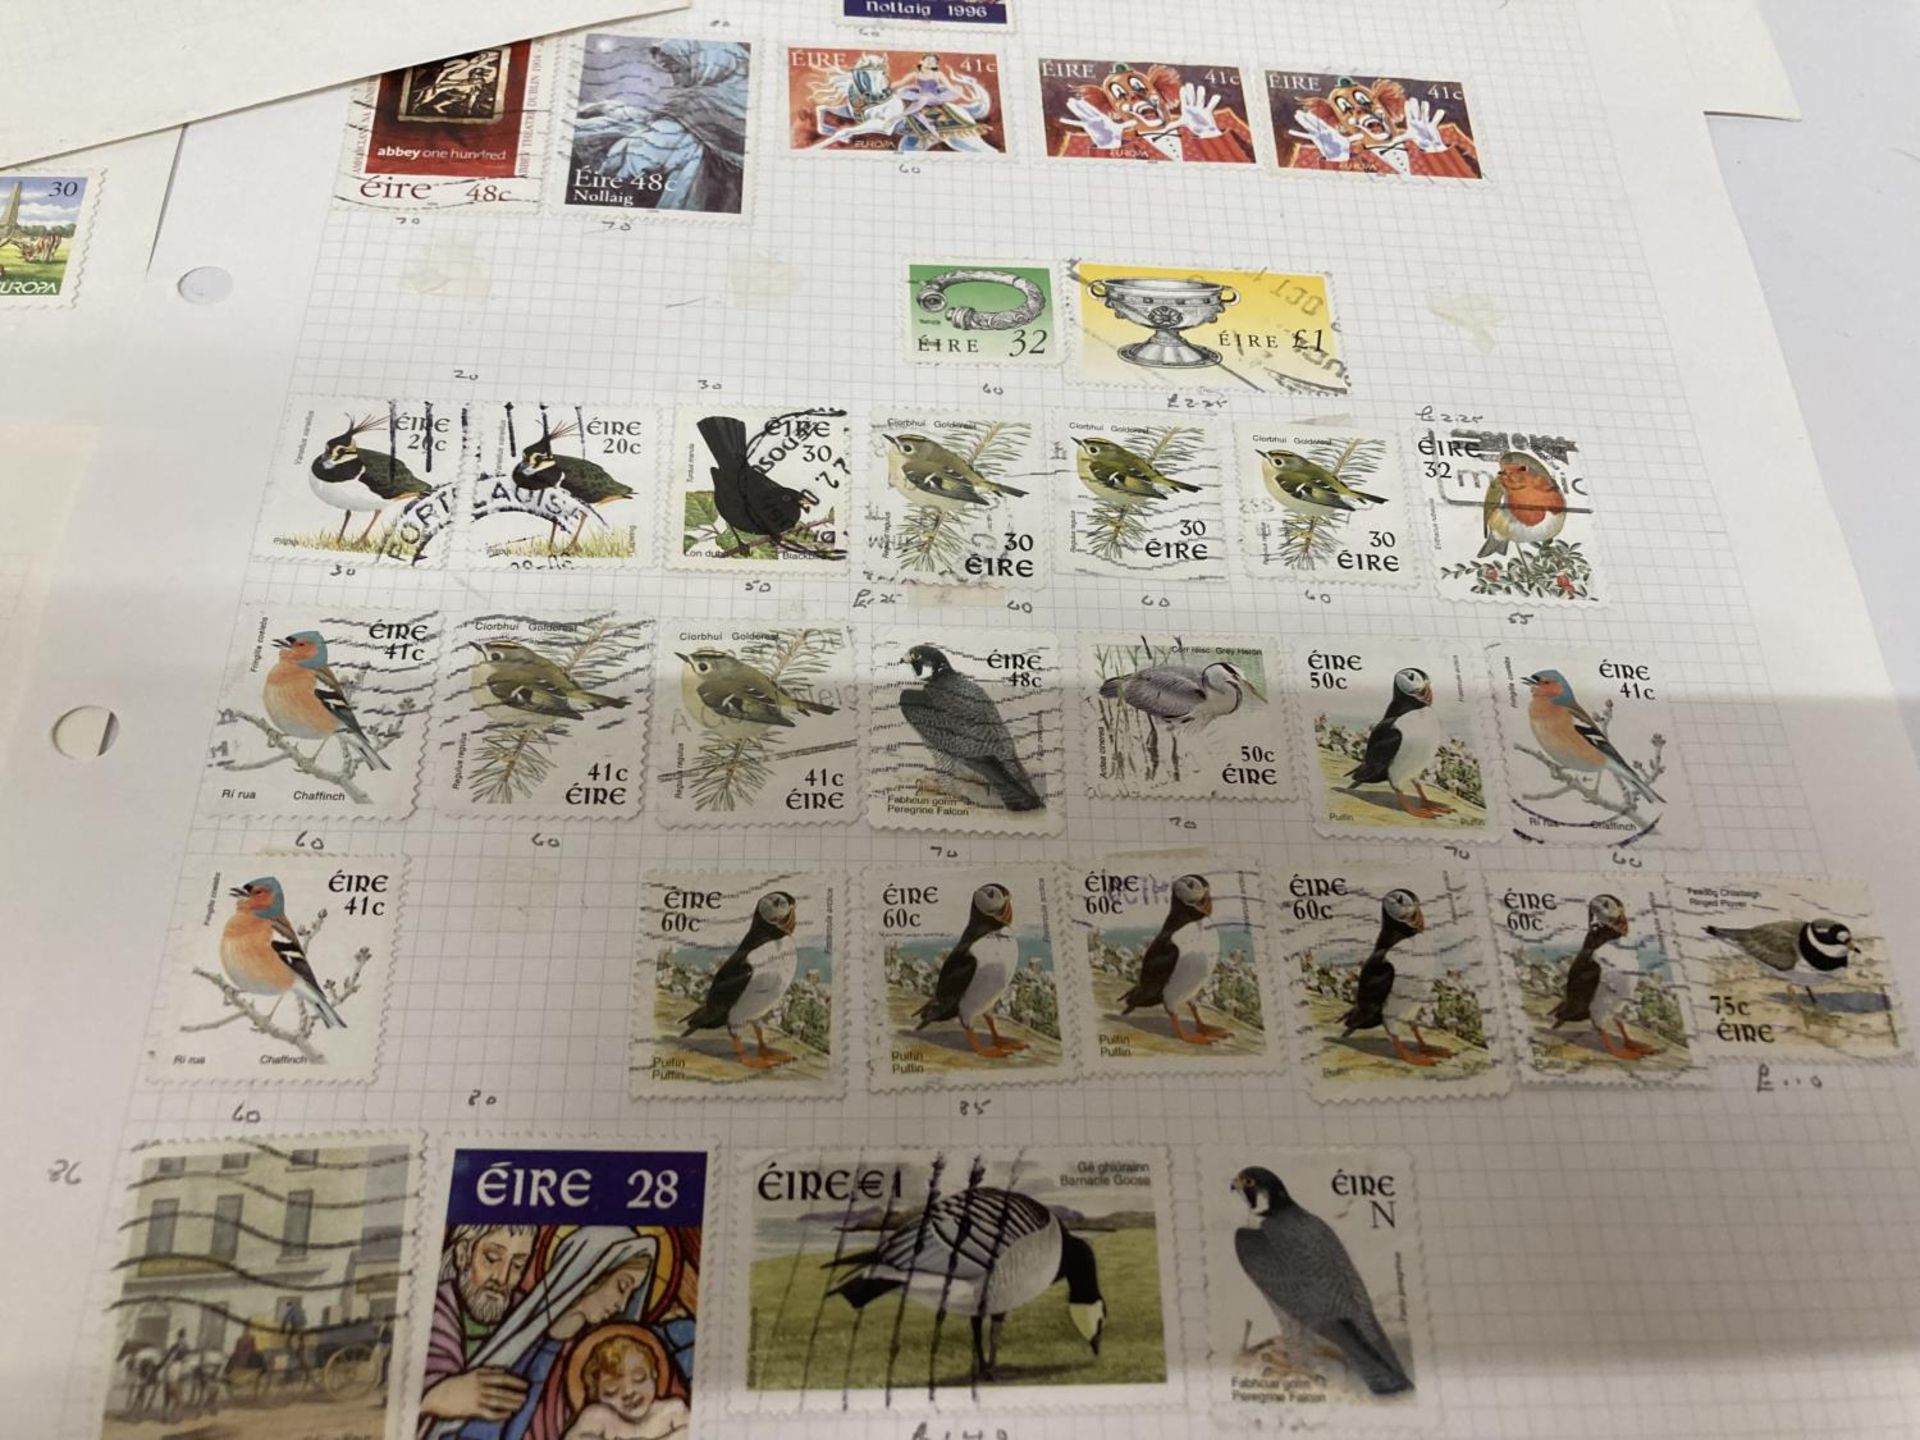 TEN PLUS SHEETS CONTAINING STAMPS FROM IRELAND - Image 2 of 6